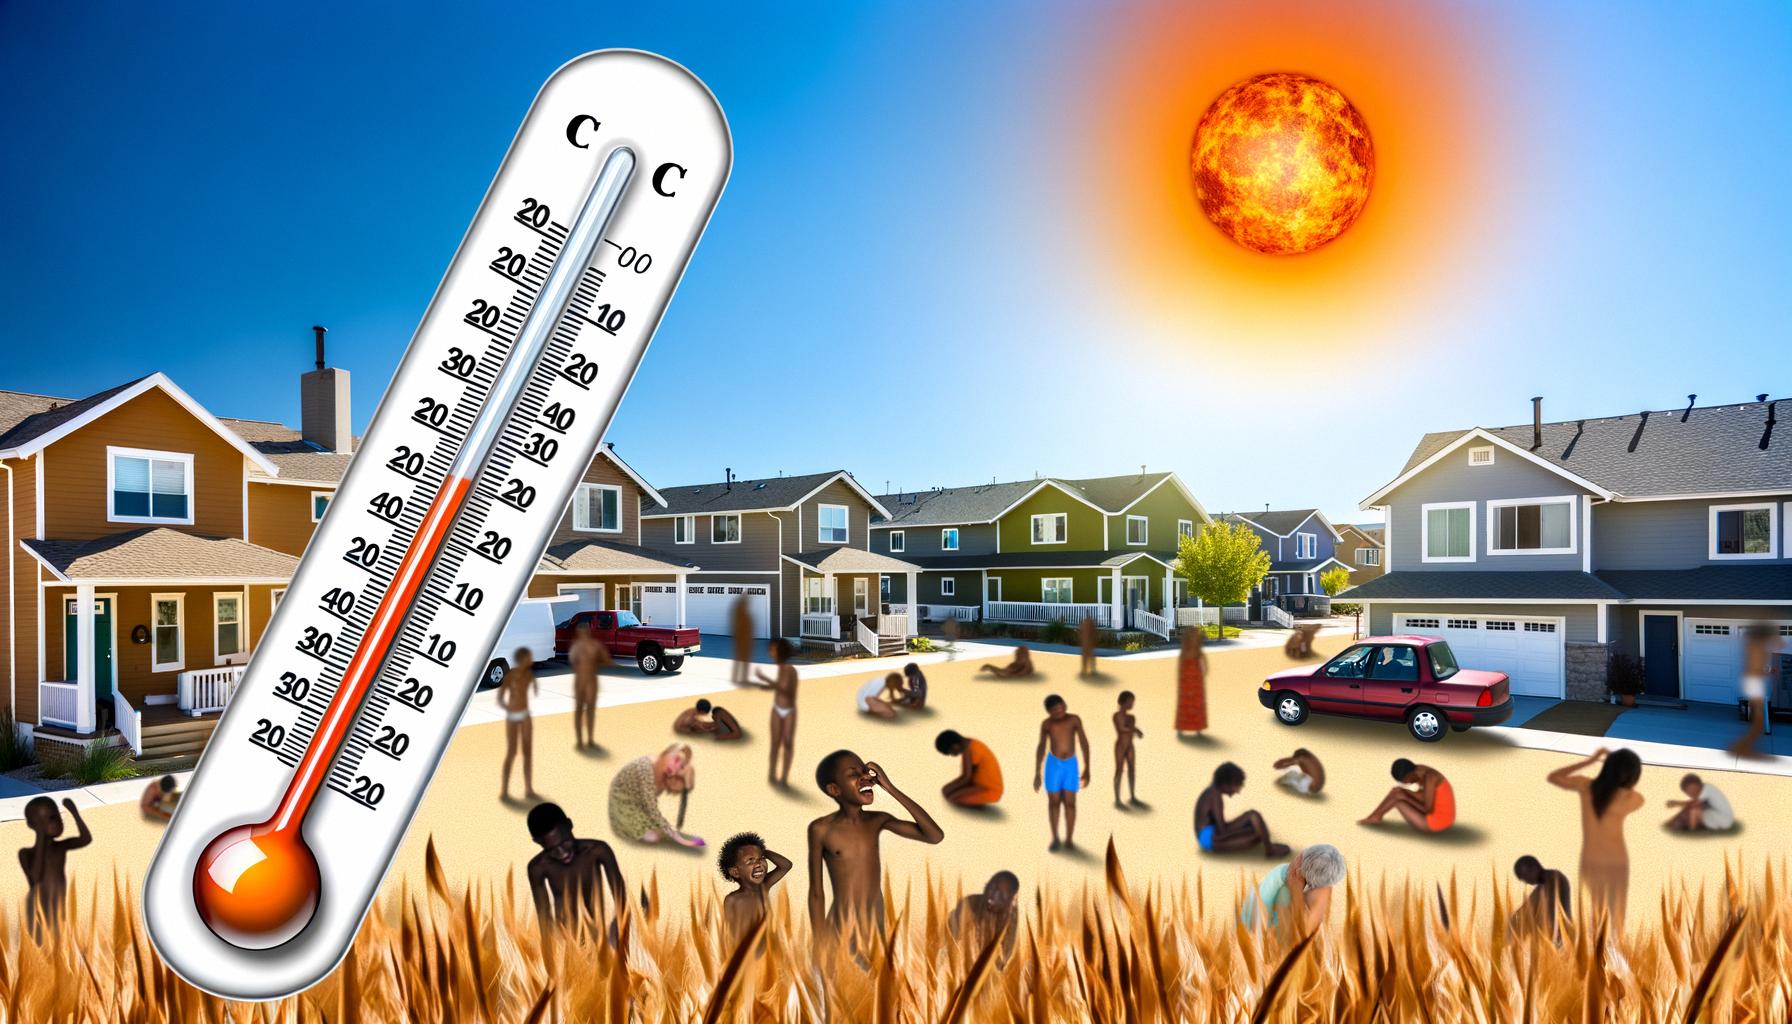 U.S. faces extreme heat waves raising health and wildfire risk Balanced News